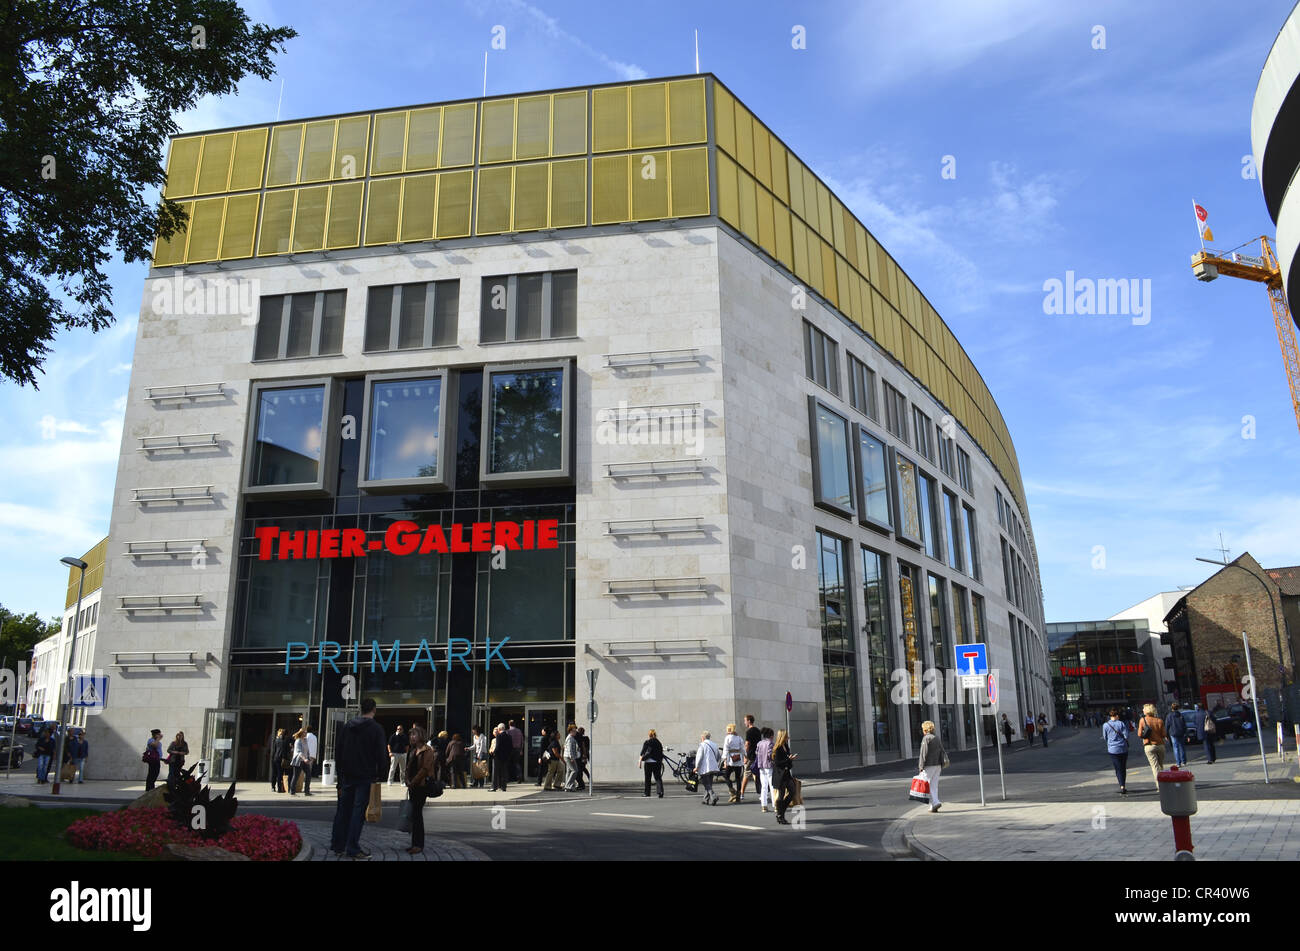 Ece Shopping Center High Resolution Stock Photography and Images - Alamy